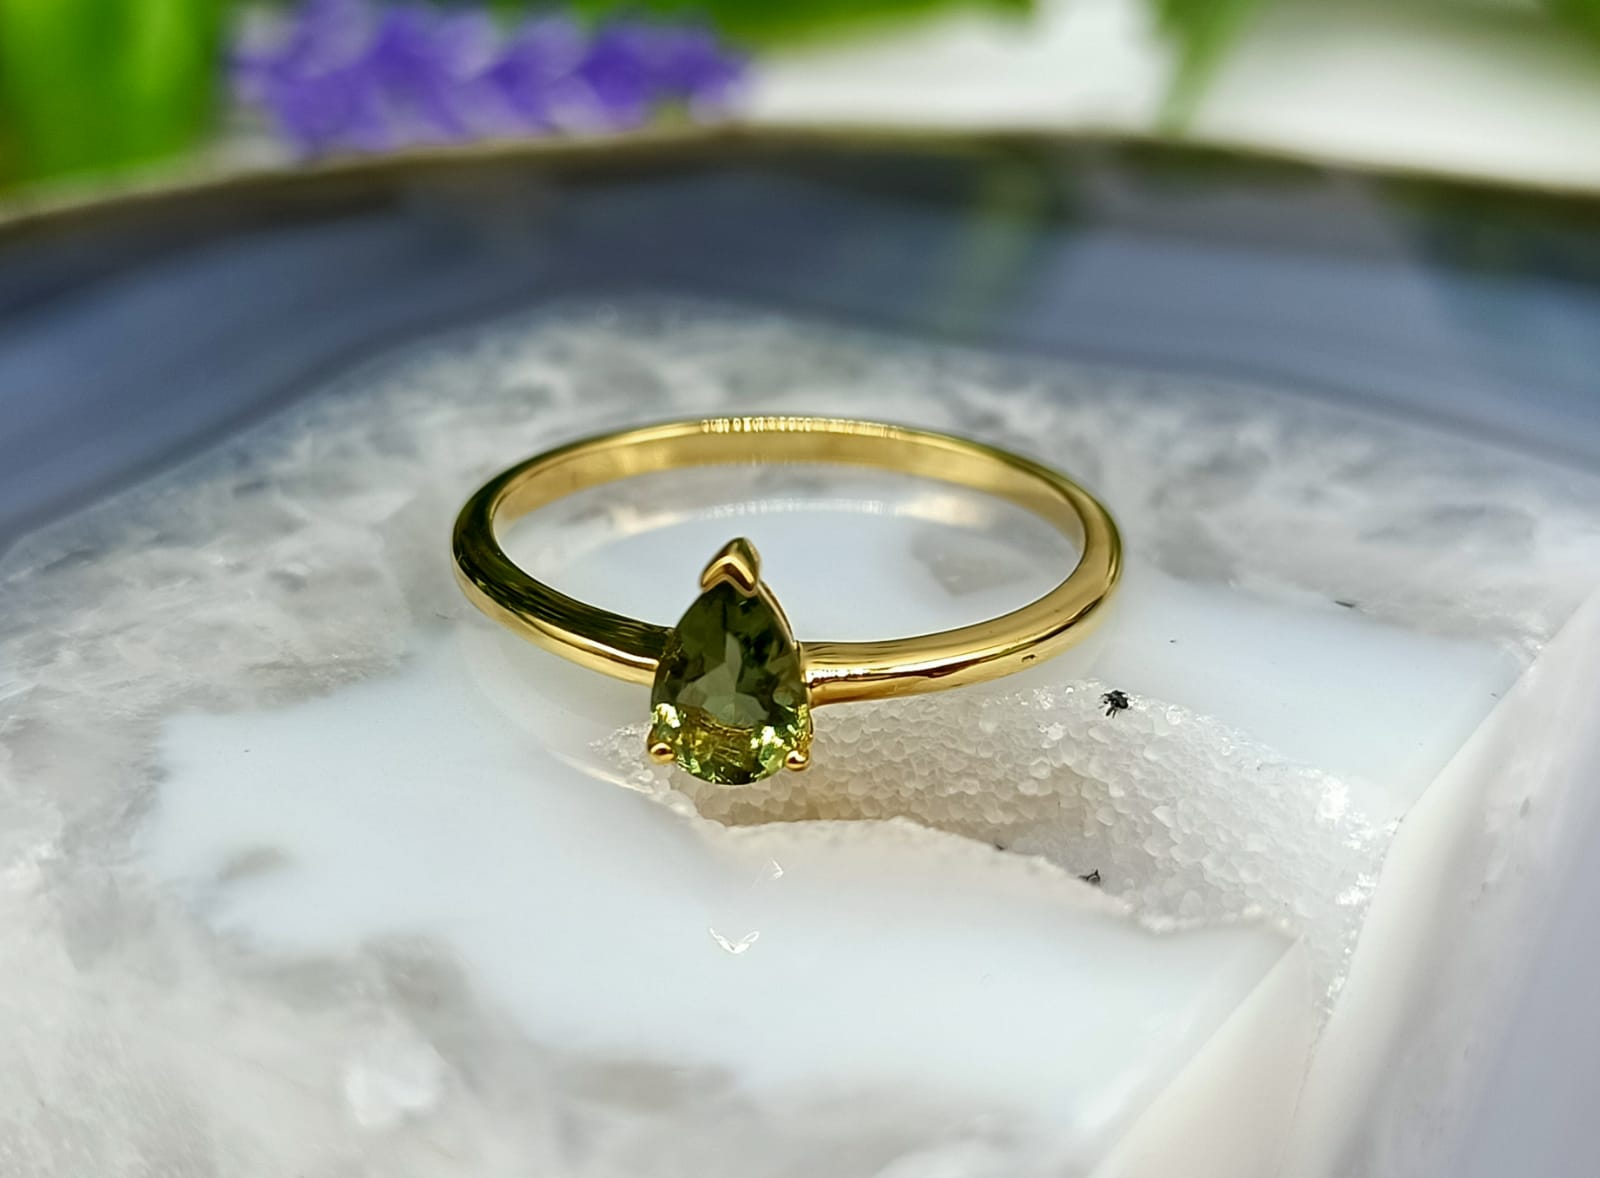 Authentic AAA Grade (Oval Faceted) Moldavite 18ct Gold Vermeil Ring Crystal Wellness